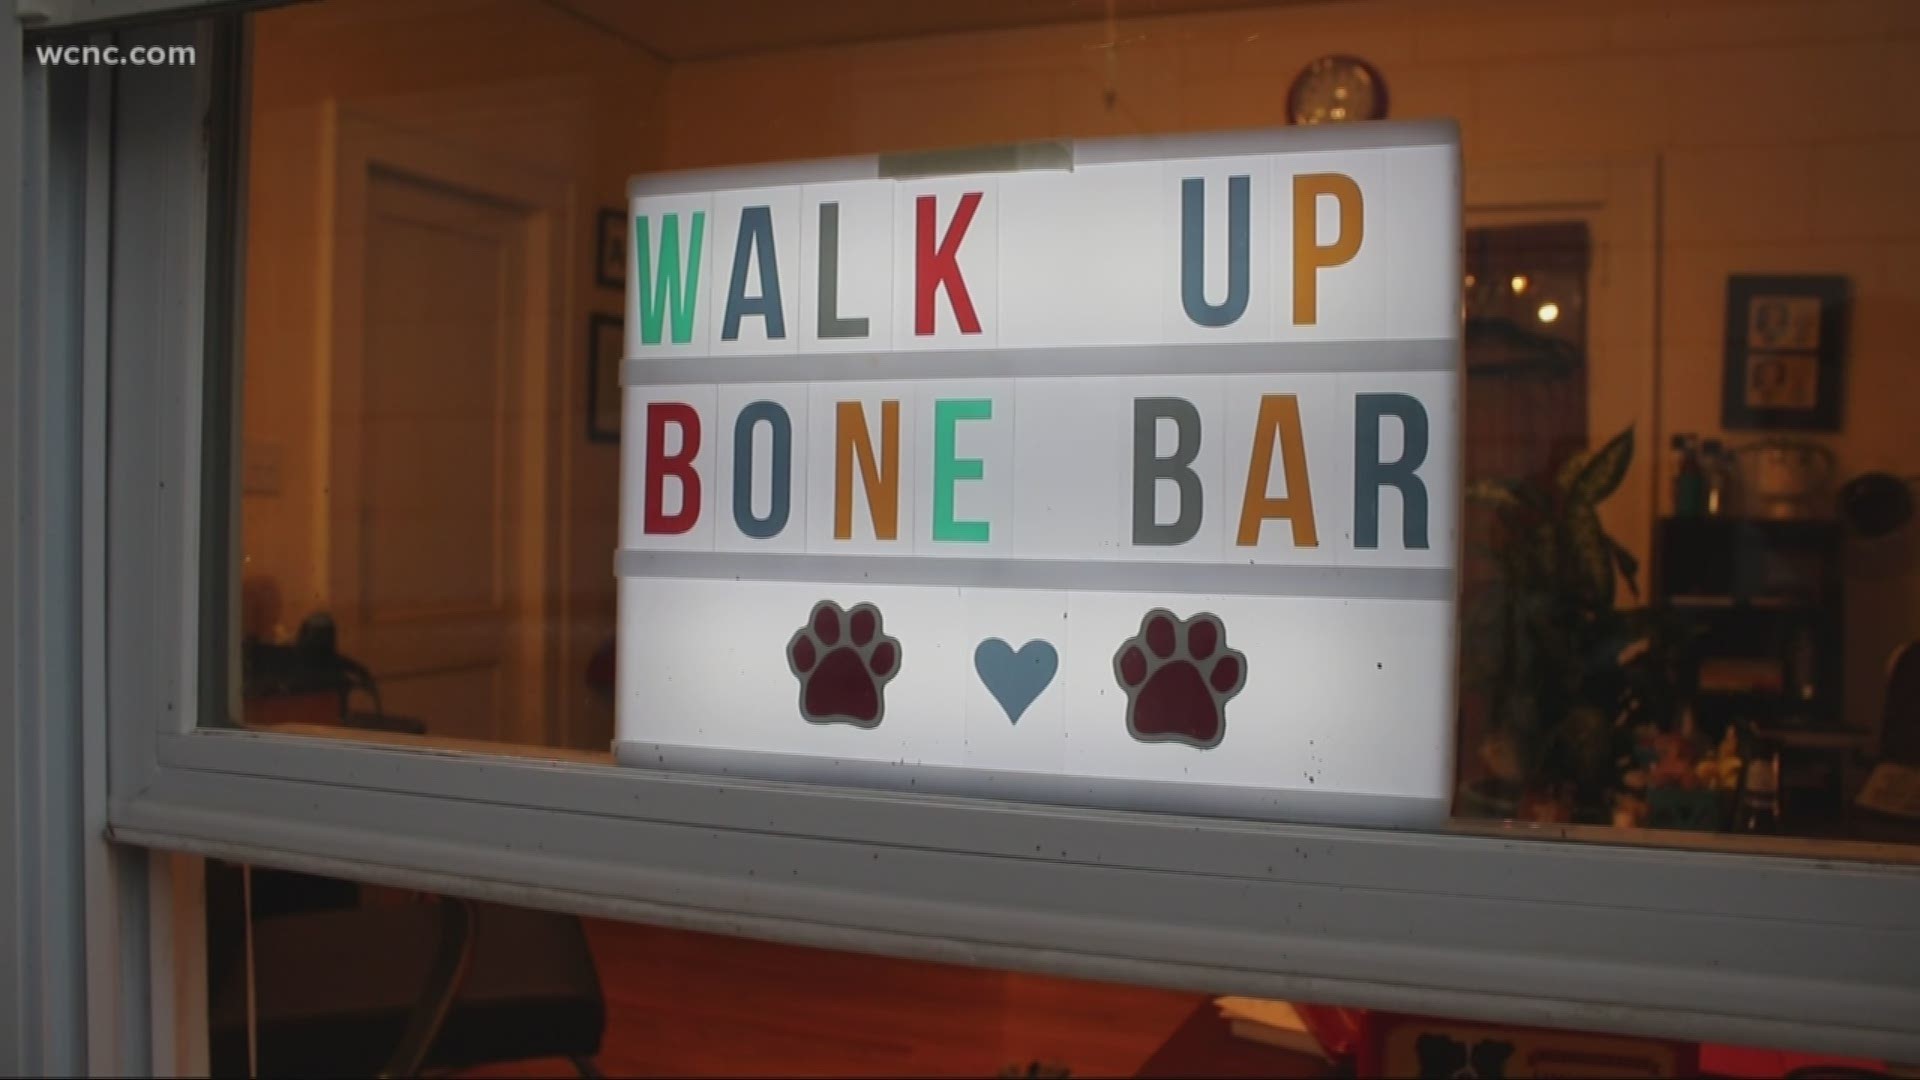 Stylist Anne Lawing runs a side hustle out of Creations by Curt Hair Studio. It's called the "Walk Up Bone Bar", and it's a popular hangout for canine clientele.